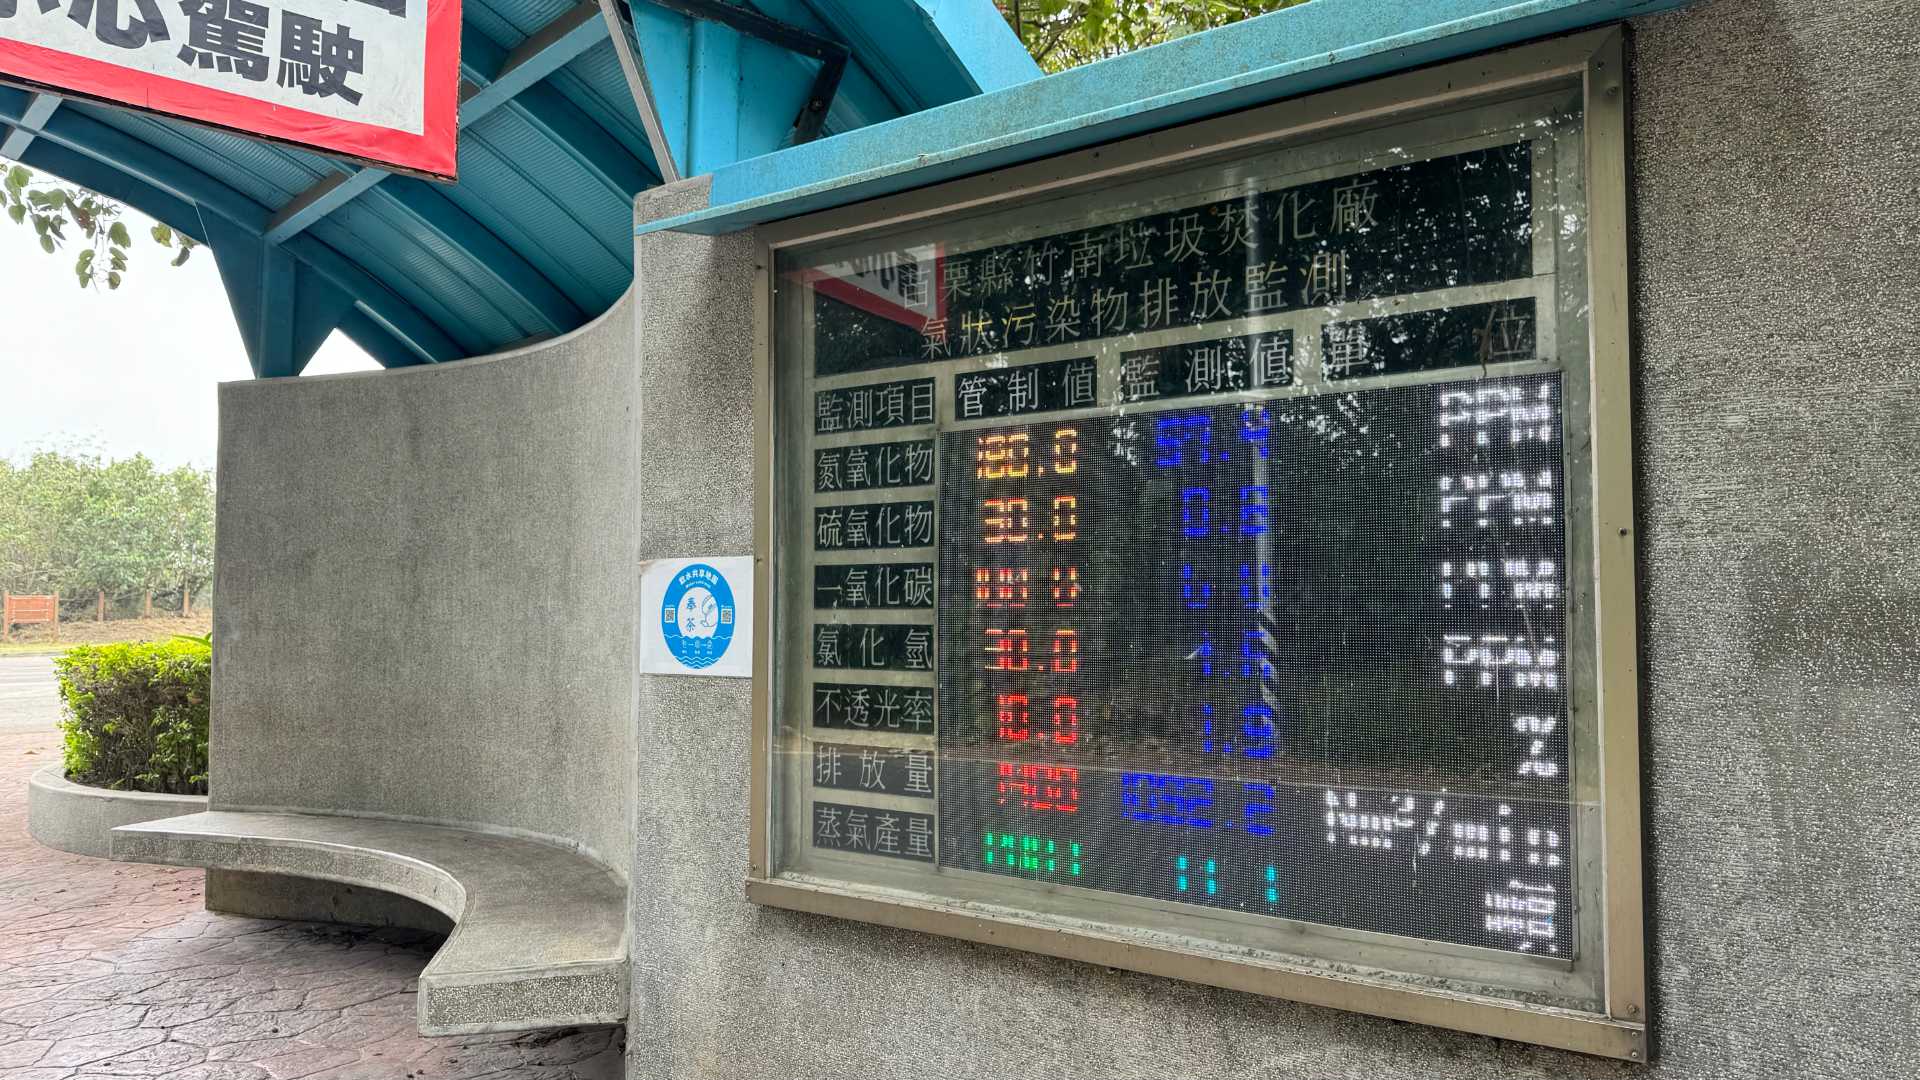 A digital information board with seven emission types listed, along with two numbers for each. Aside from the numbers, all writing is in Chinese. The display is mounted on a structure that resembles a bus shelter.